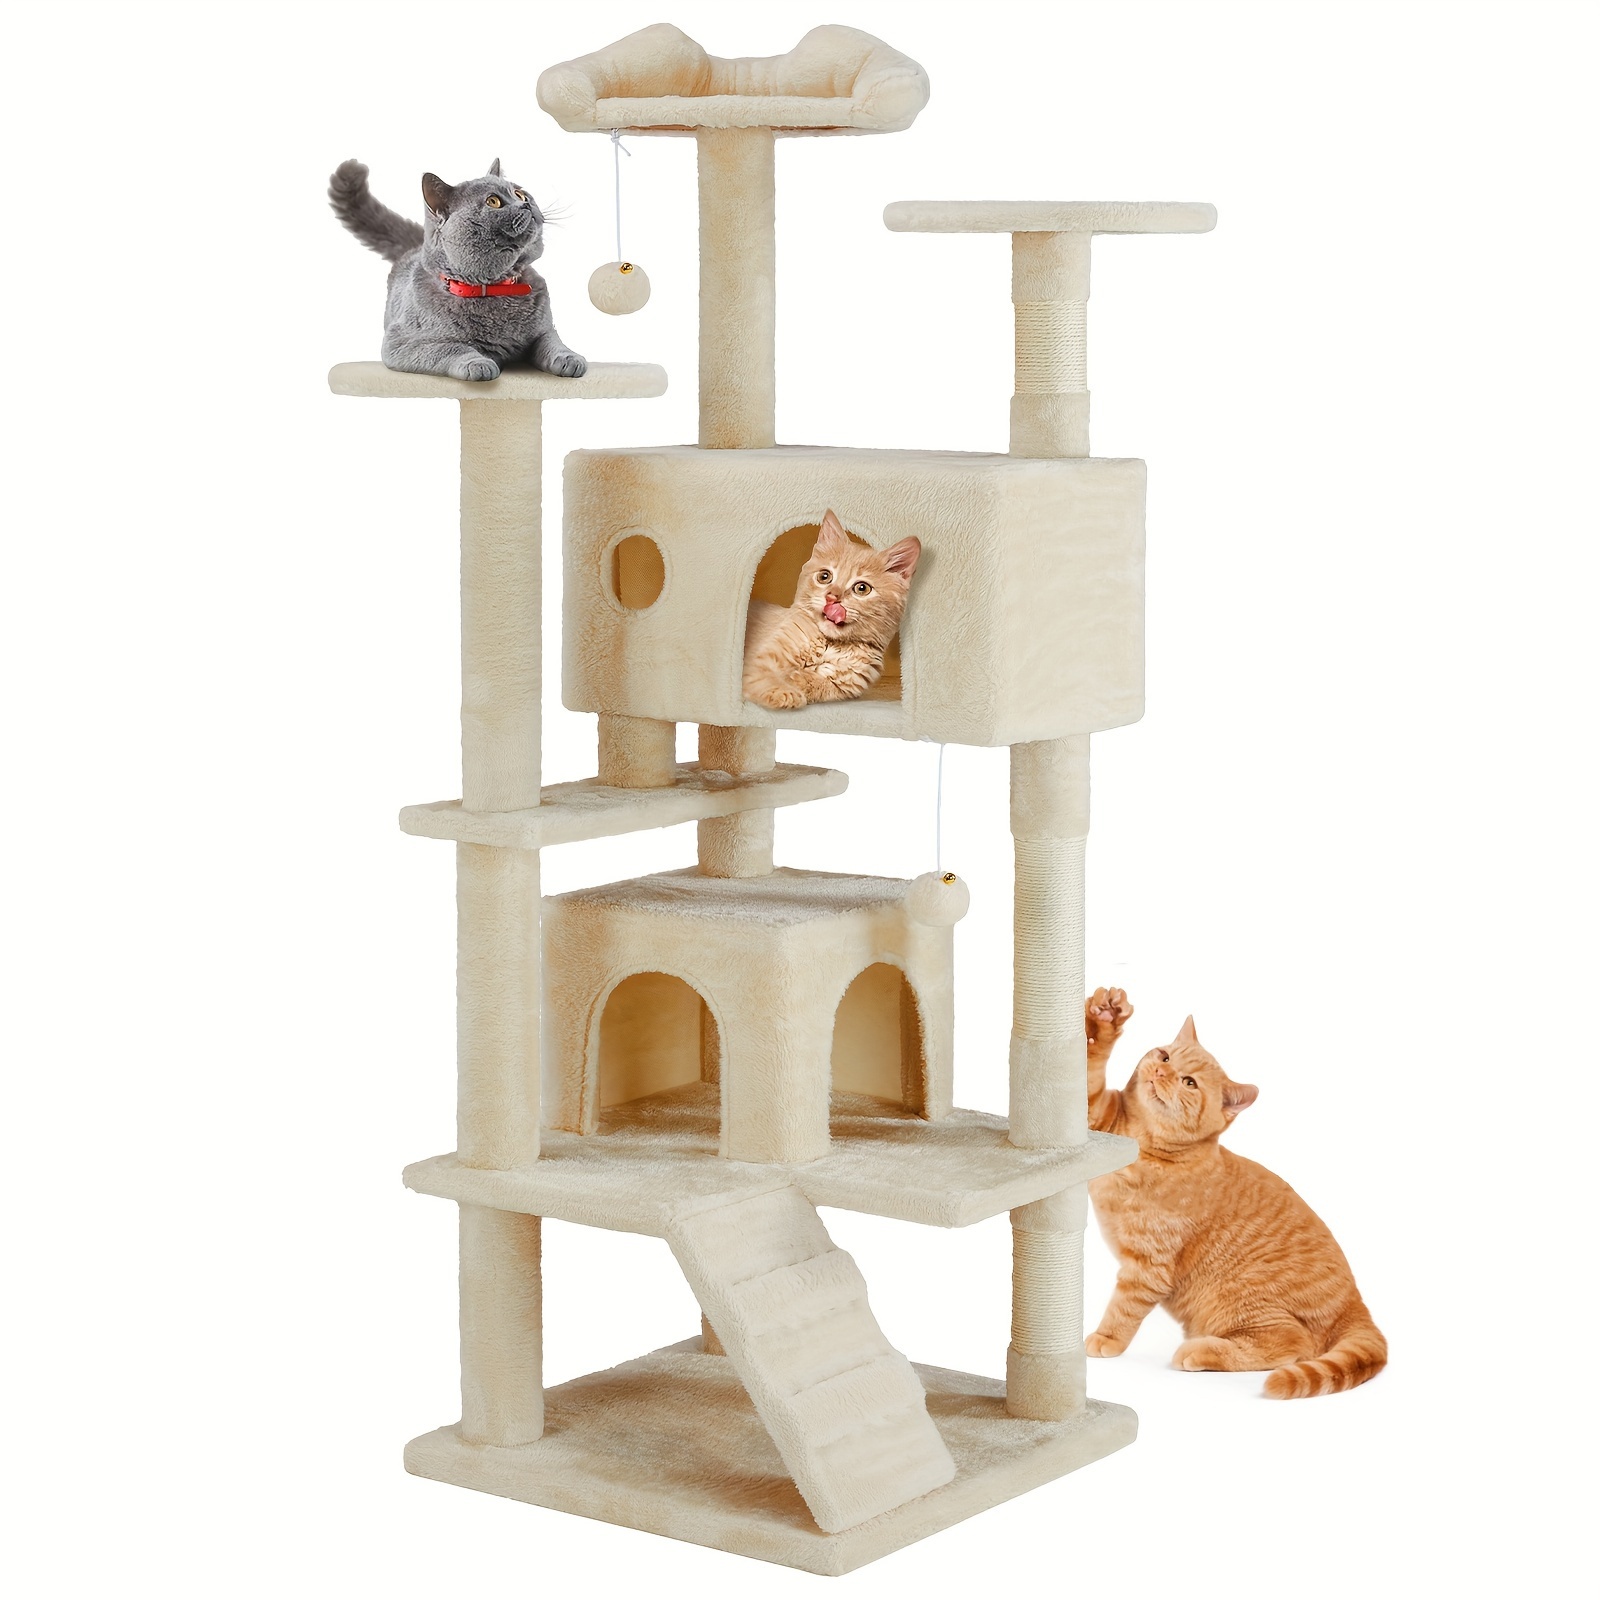 

Indoor Cat Tree Tower, Multi-level Cat Tree For Large Cats, Kitty, Pet House With 2 Condo, Scratching Post, Round Plate, Small Ladder, Cat Tree Toy For All Age Cats